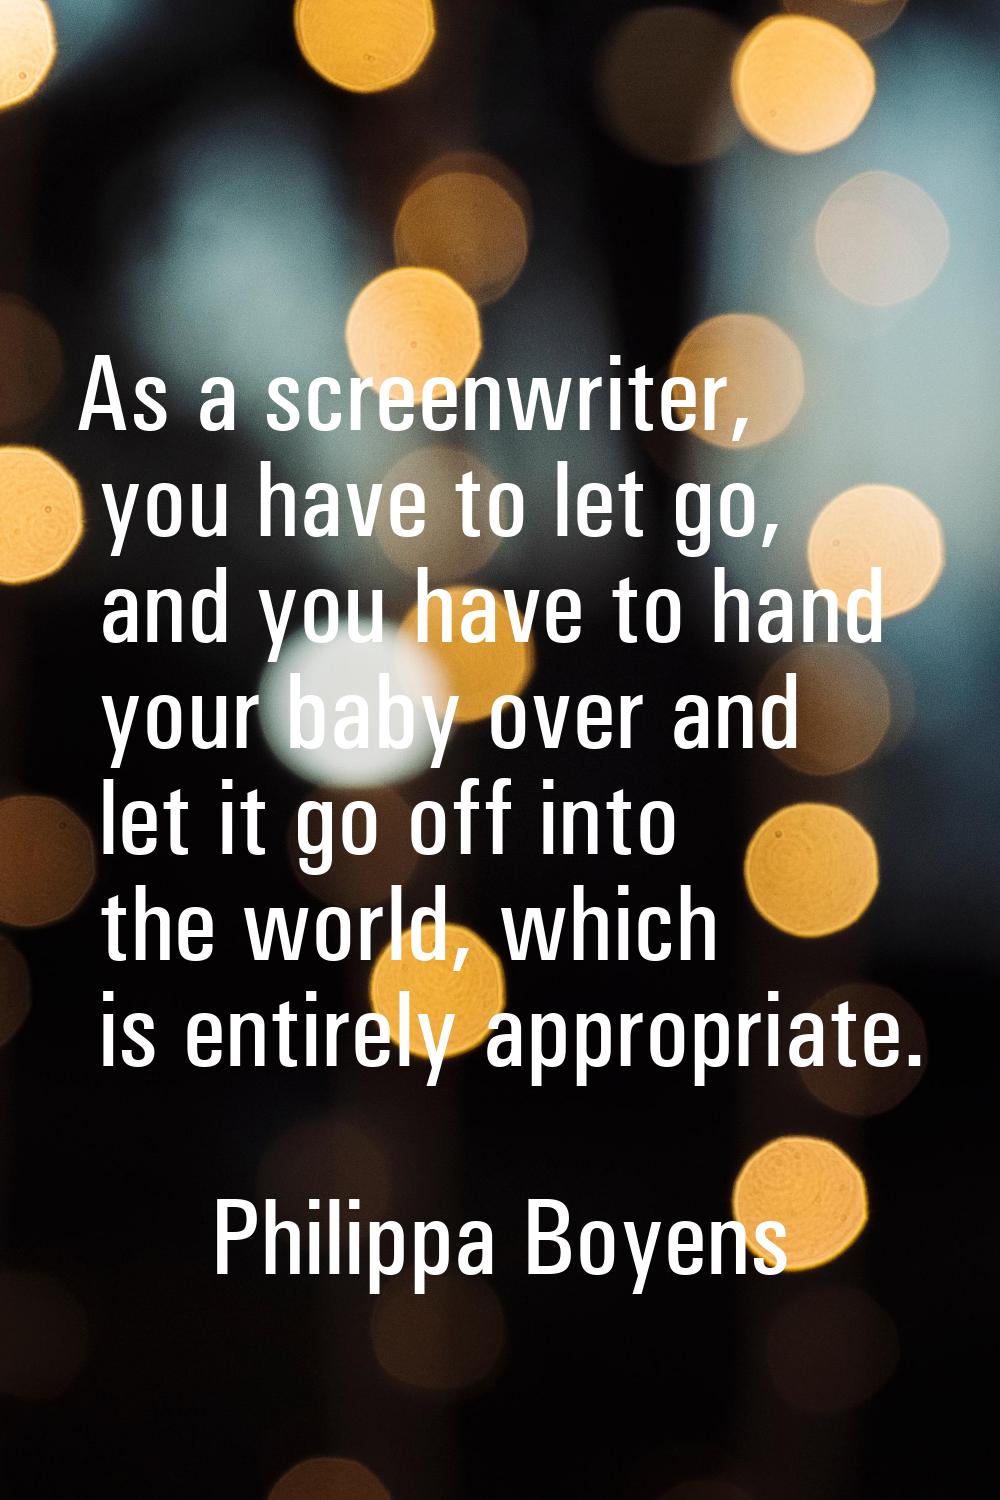 As a screenwriter, you have to let go, and you have to hand your baby over and let it go off into t